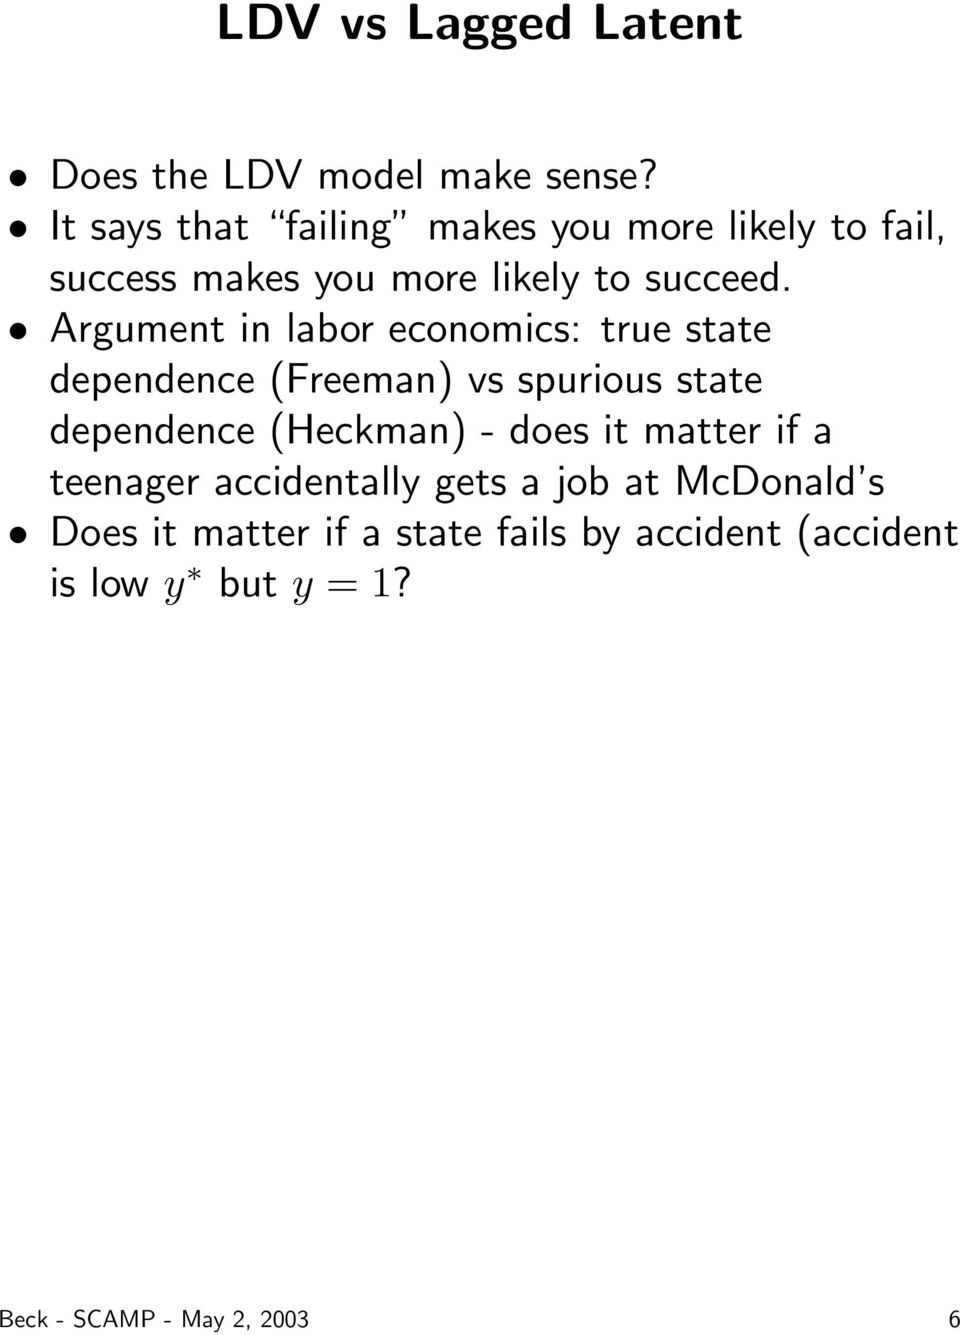 Argument in labor economics: true state dependence (Freeman) vs spurious state dependence (Heckman) -